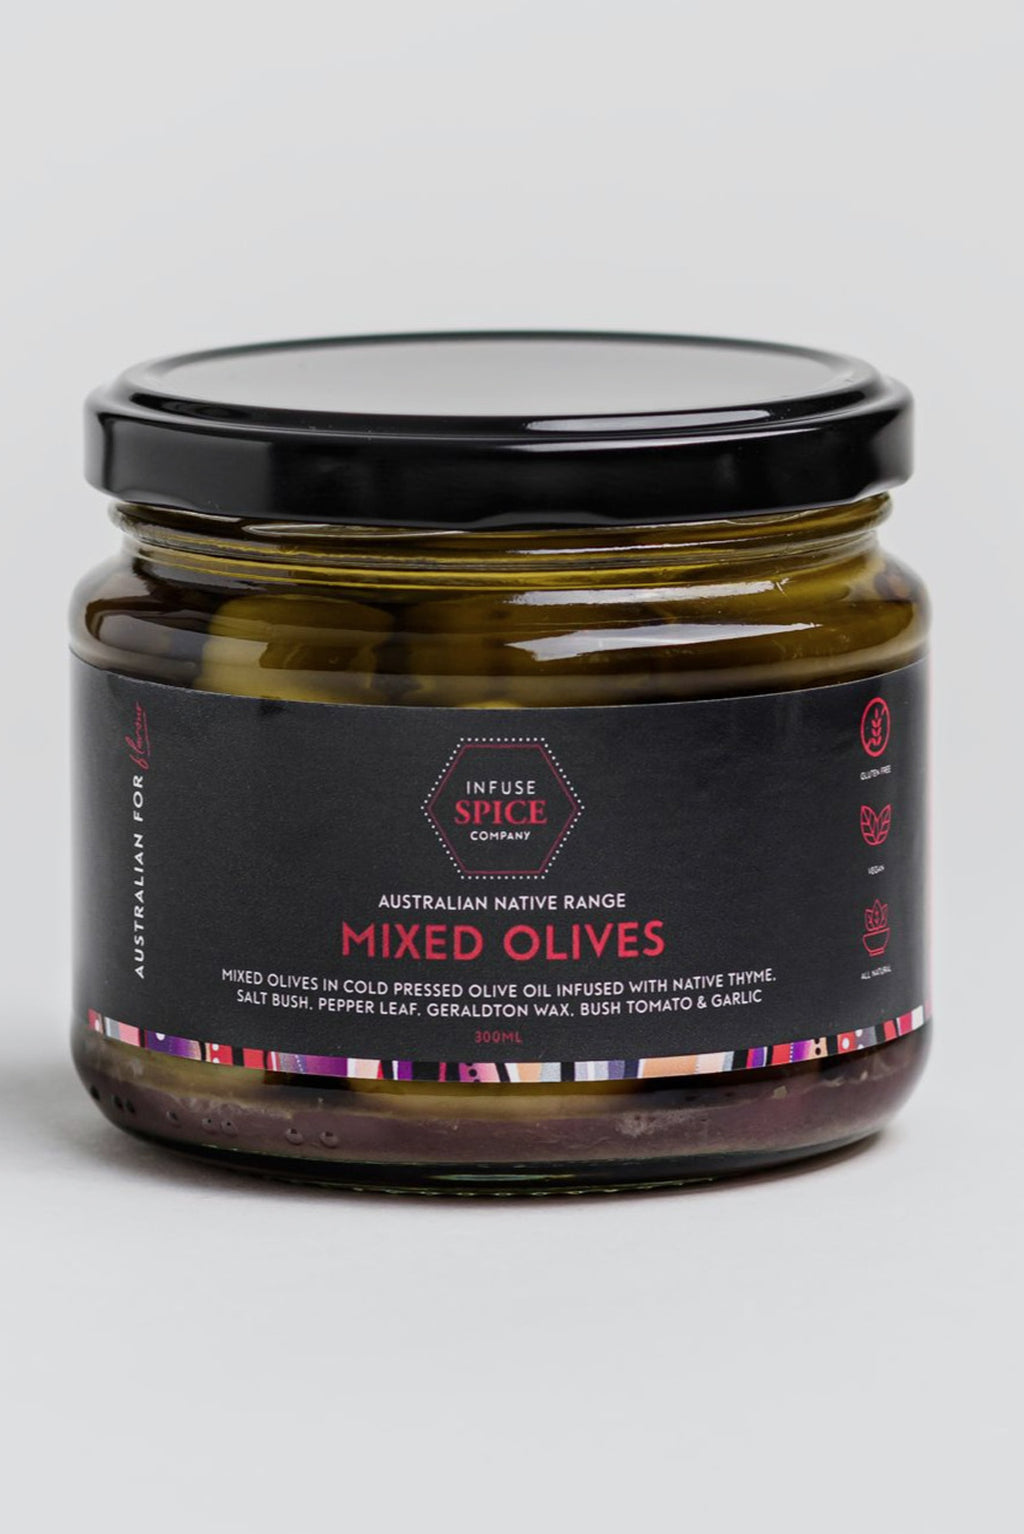 Mixed Olives in cold pressed olive oil infused with Native Thyme, Salt bush, Pepper leaf, Geraldton Wax, Bush Tomato & Garlic